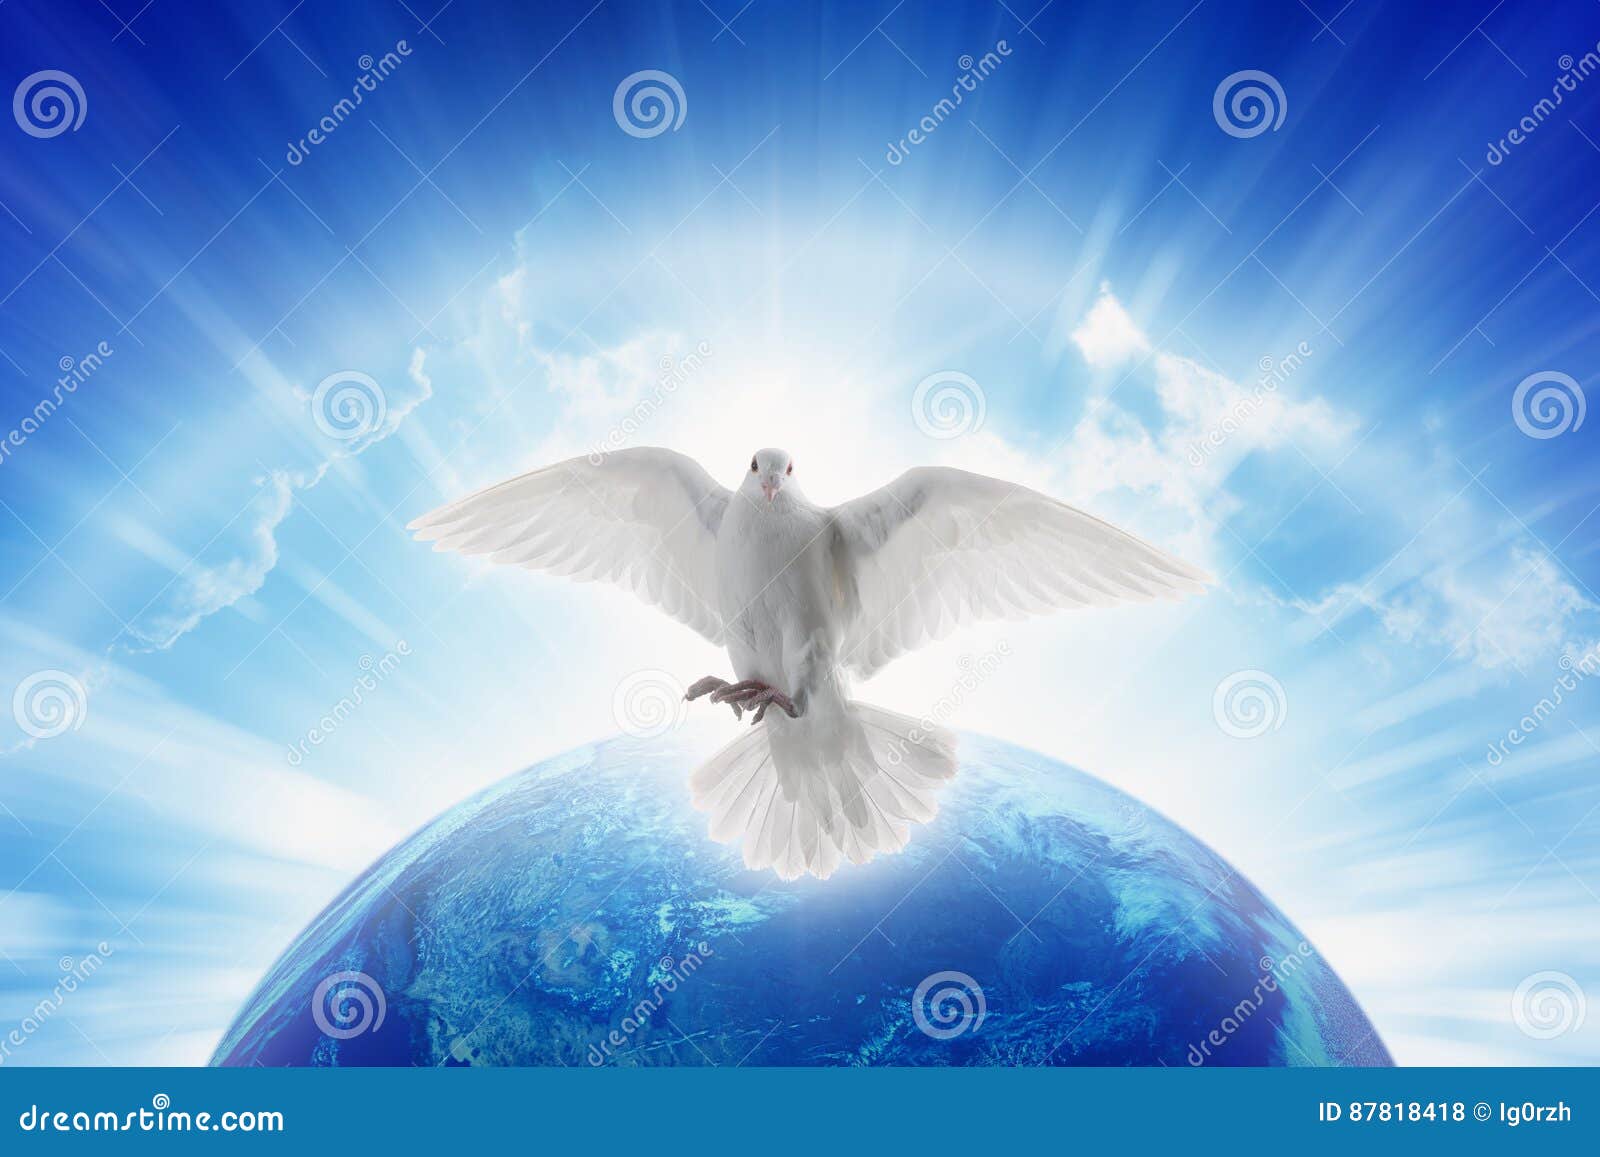 white dove  of love and peace flies above planet earth